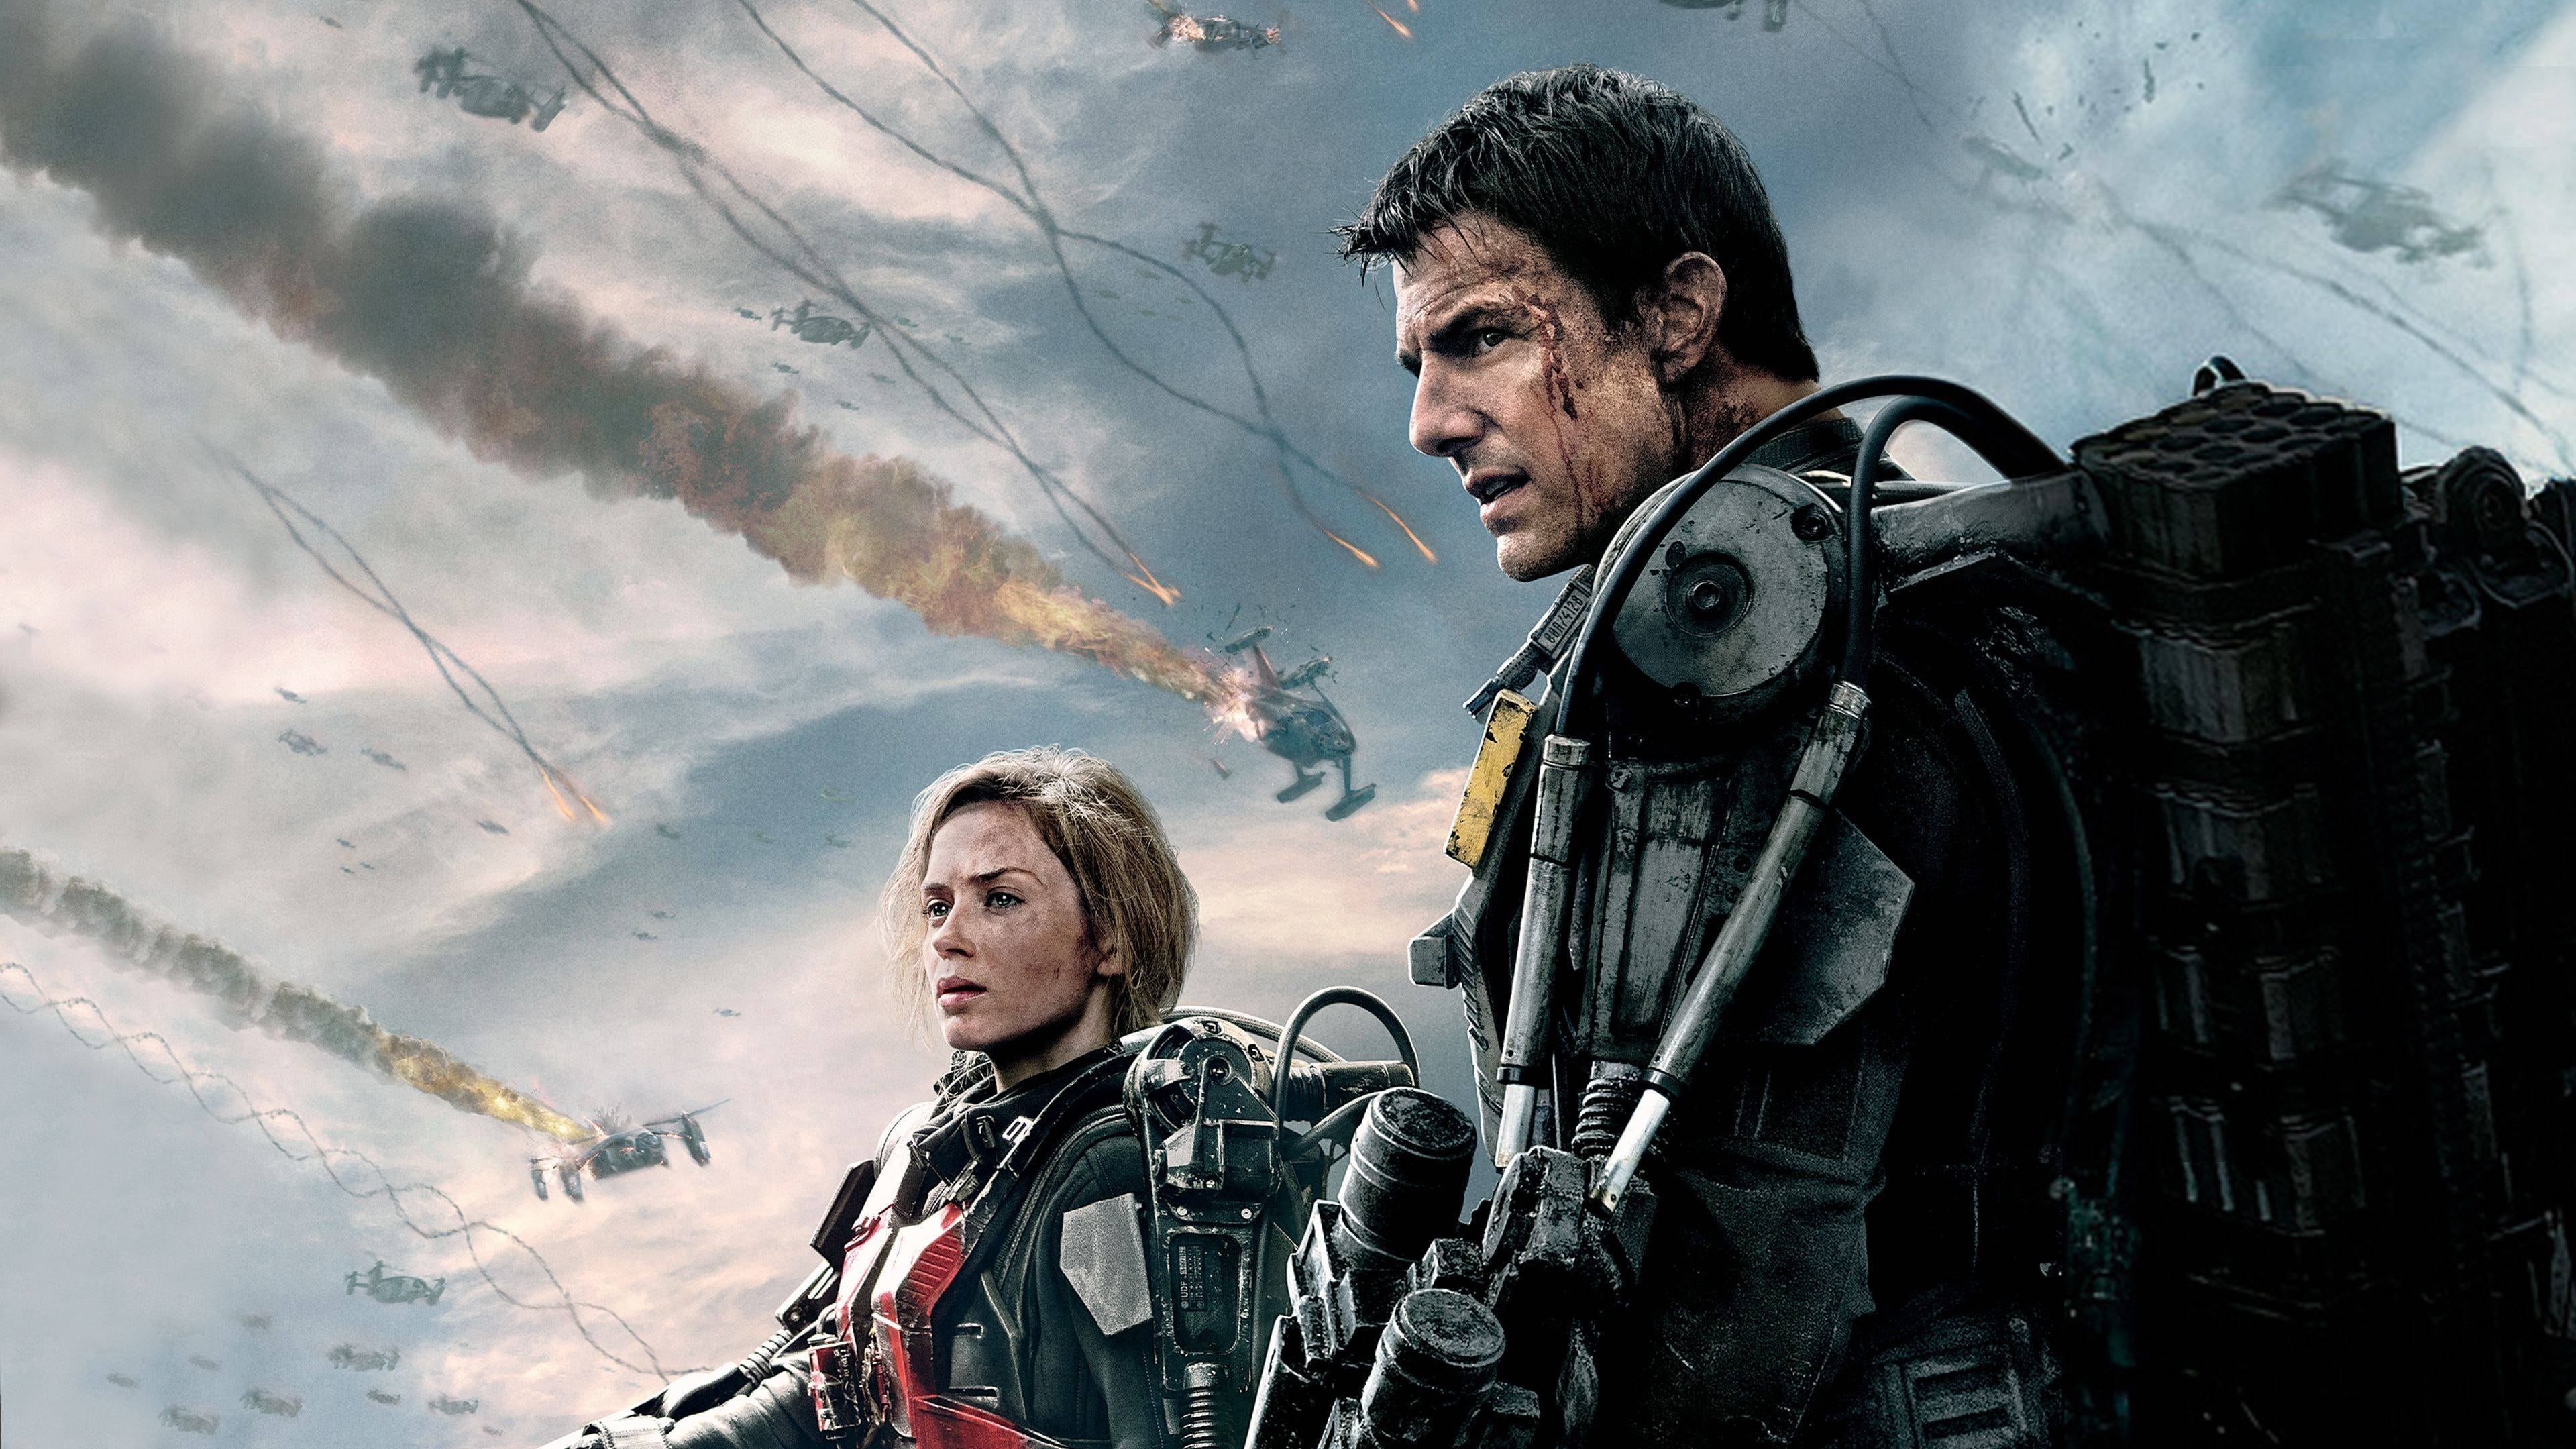 Edge of Tomorrow: The film takes place in the year 2020 where Earth is invaded by an alien race called the Mimics. 3840x2160 4K Wallpaper.